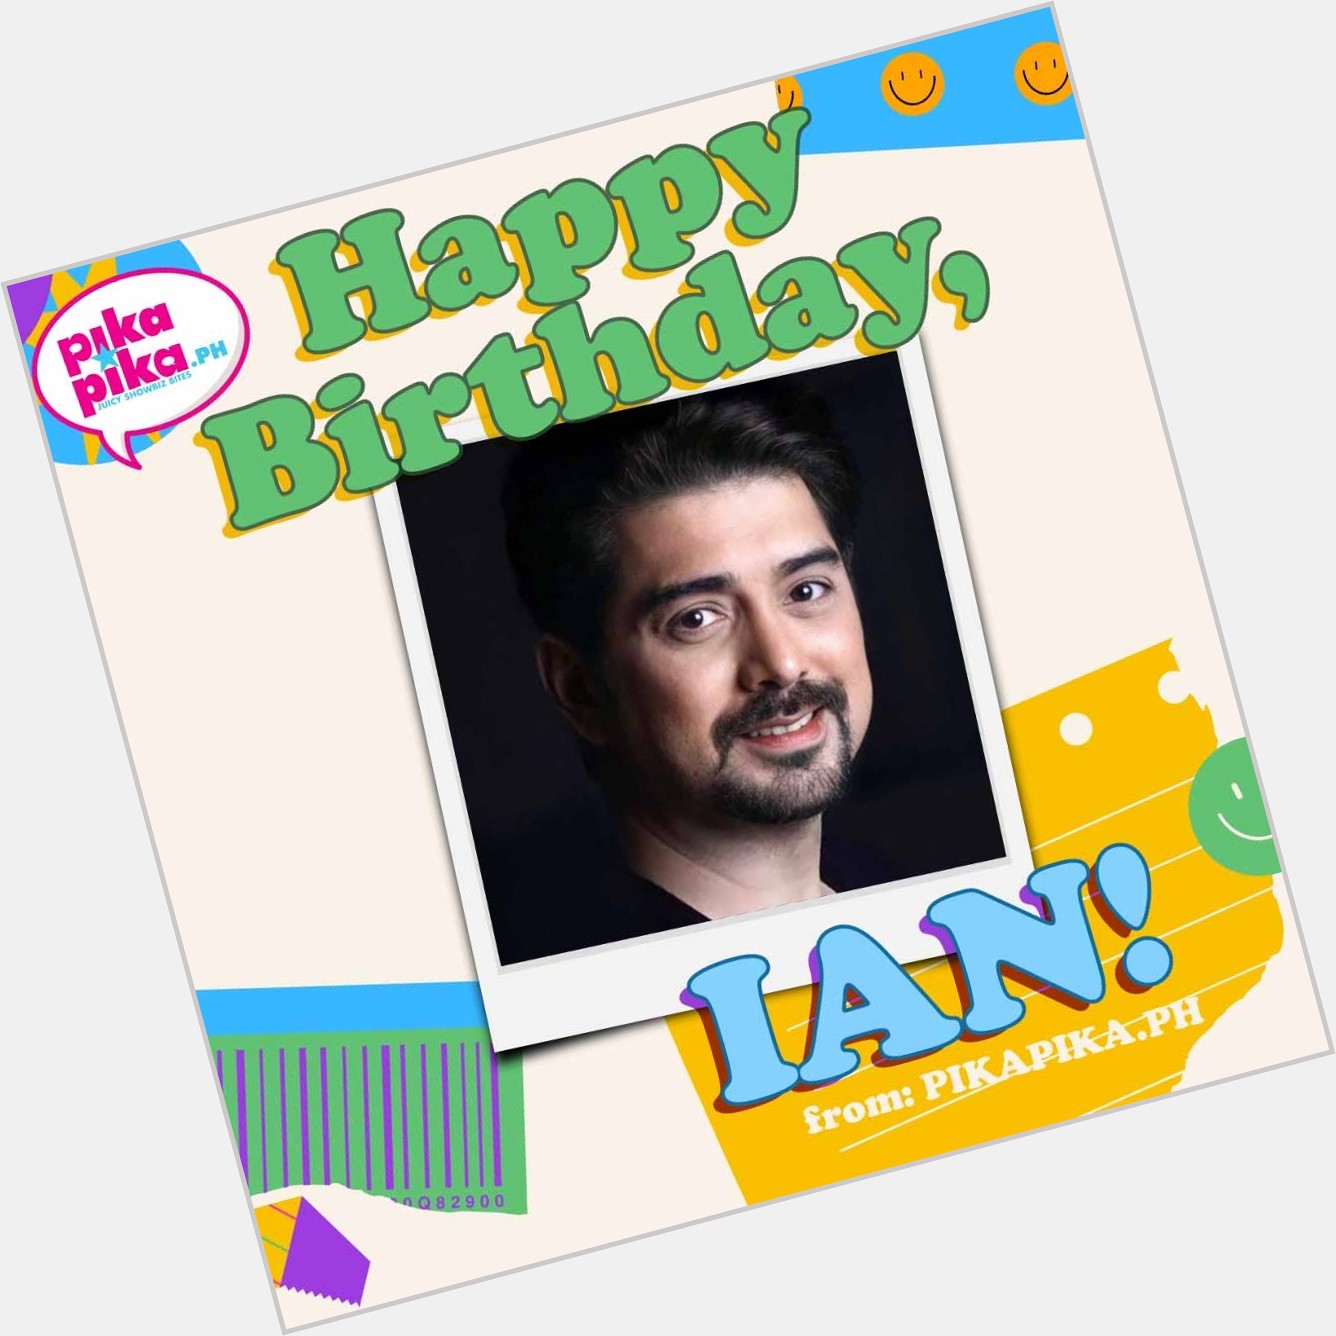 Happy birthday, Ian Veneracion! May you have a wonderful day and a great year ahead.   